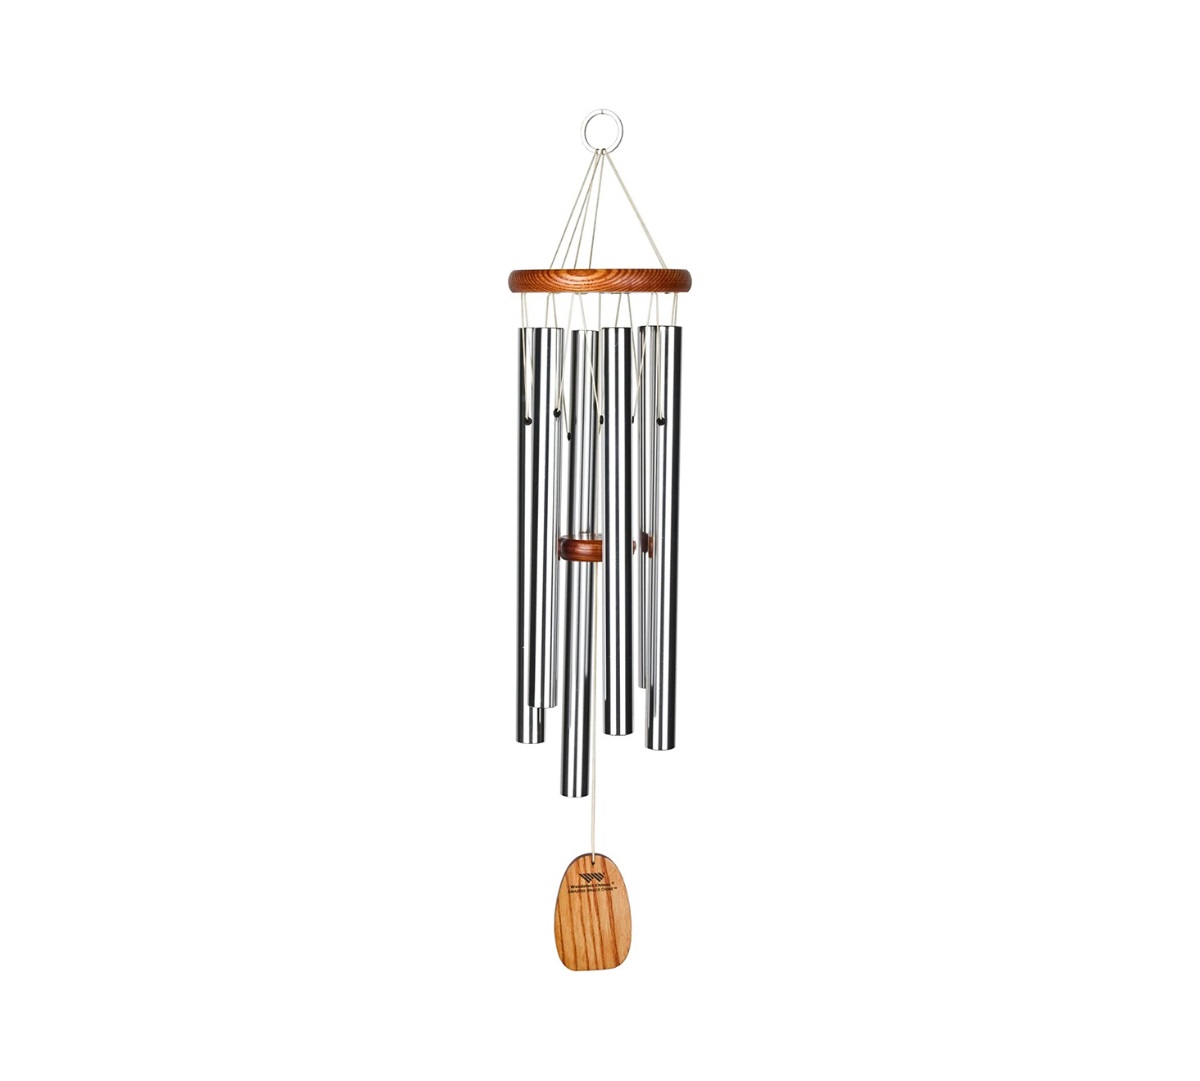 5-best-wind-chime